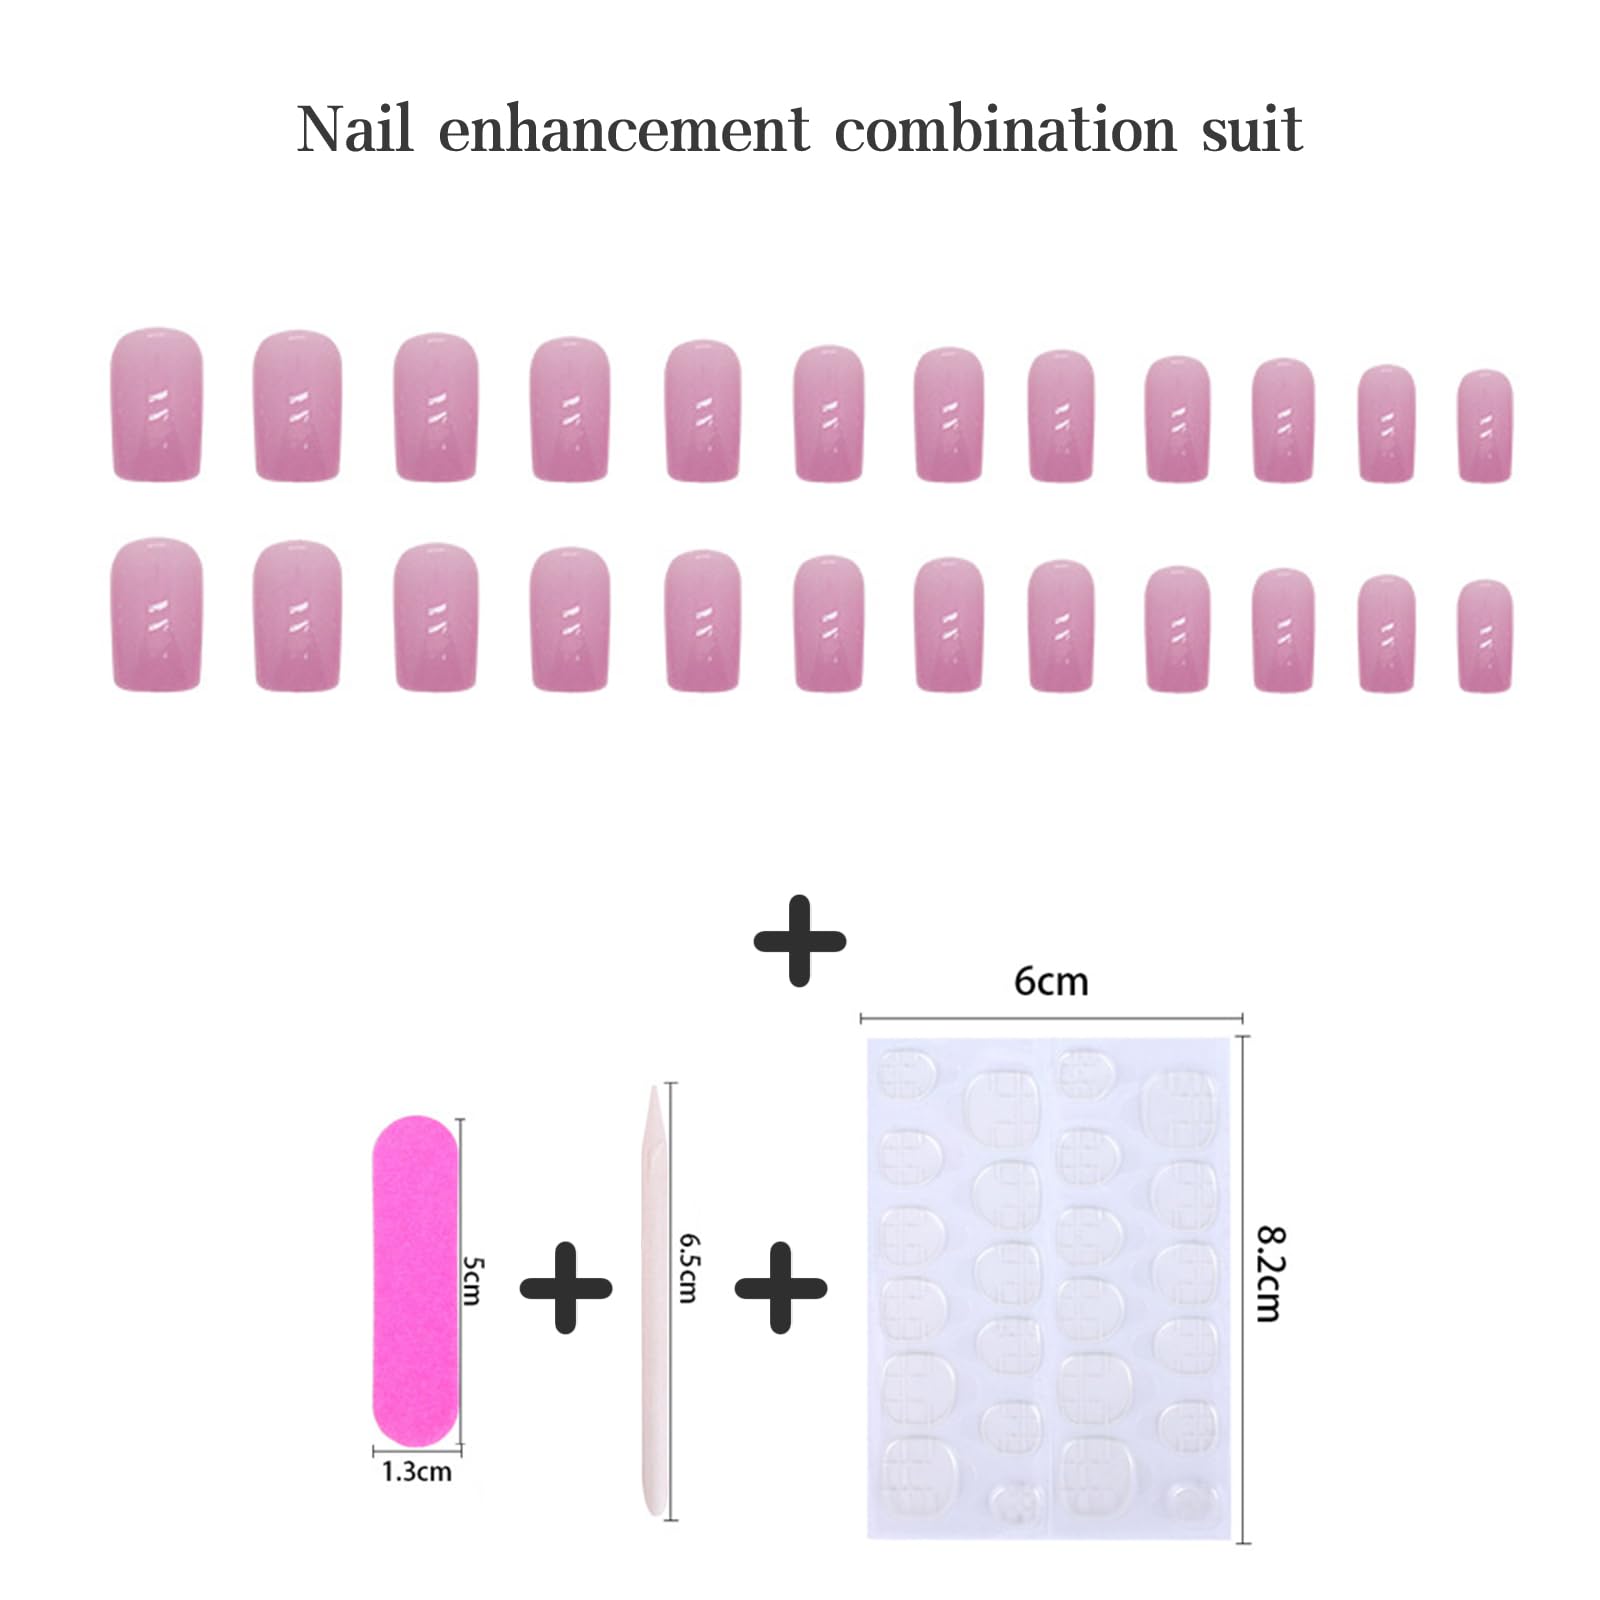 24pcs Short Square False Nails, Light Purple Stick on Nails Solid Color Press on Nails Removable Glue-on Nails Full Cover Fake Nails Women Girls Nail Art Accessories